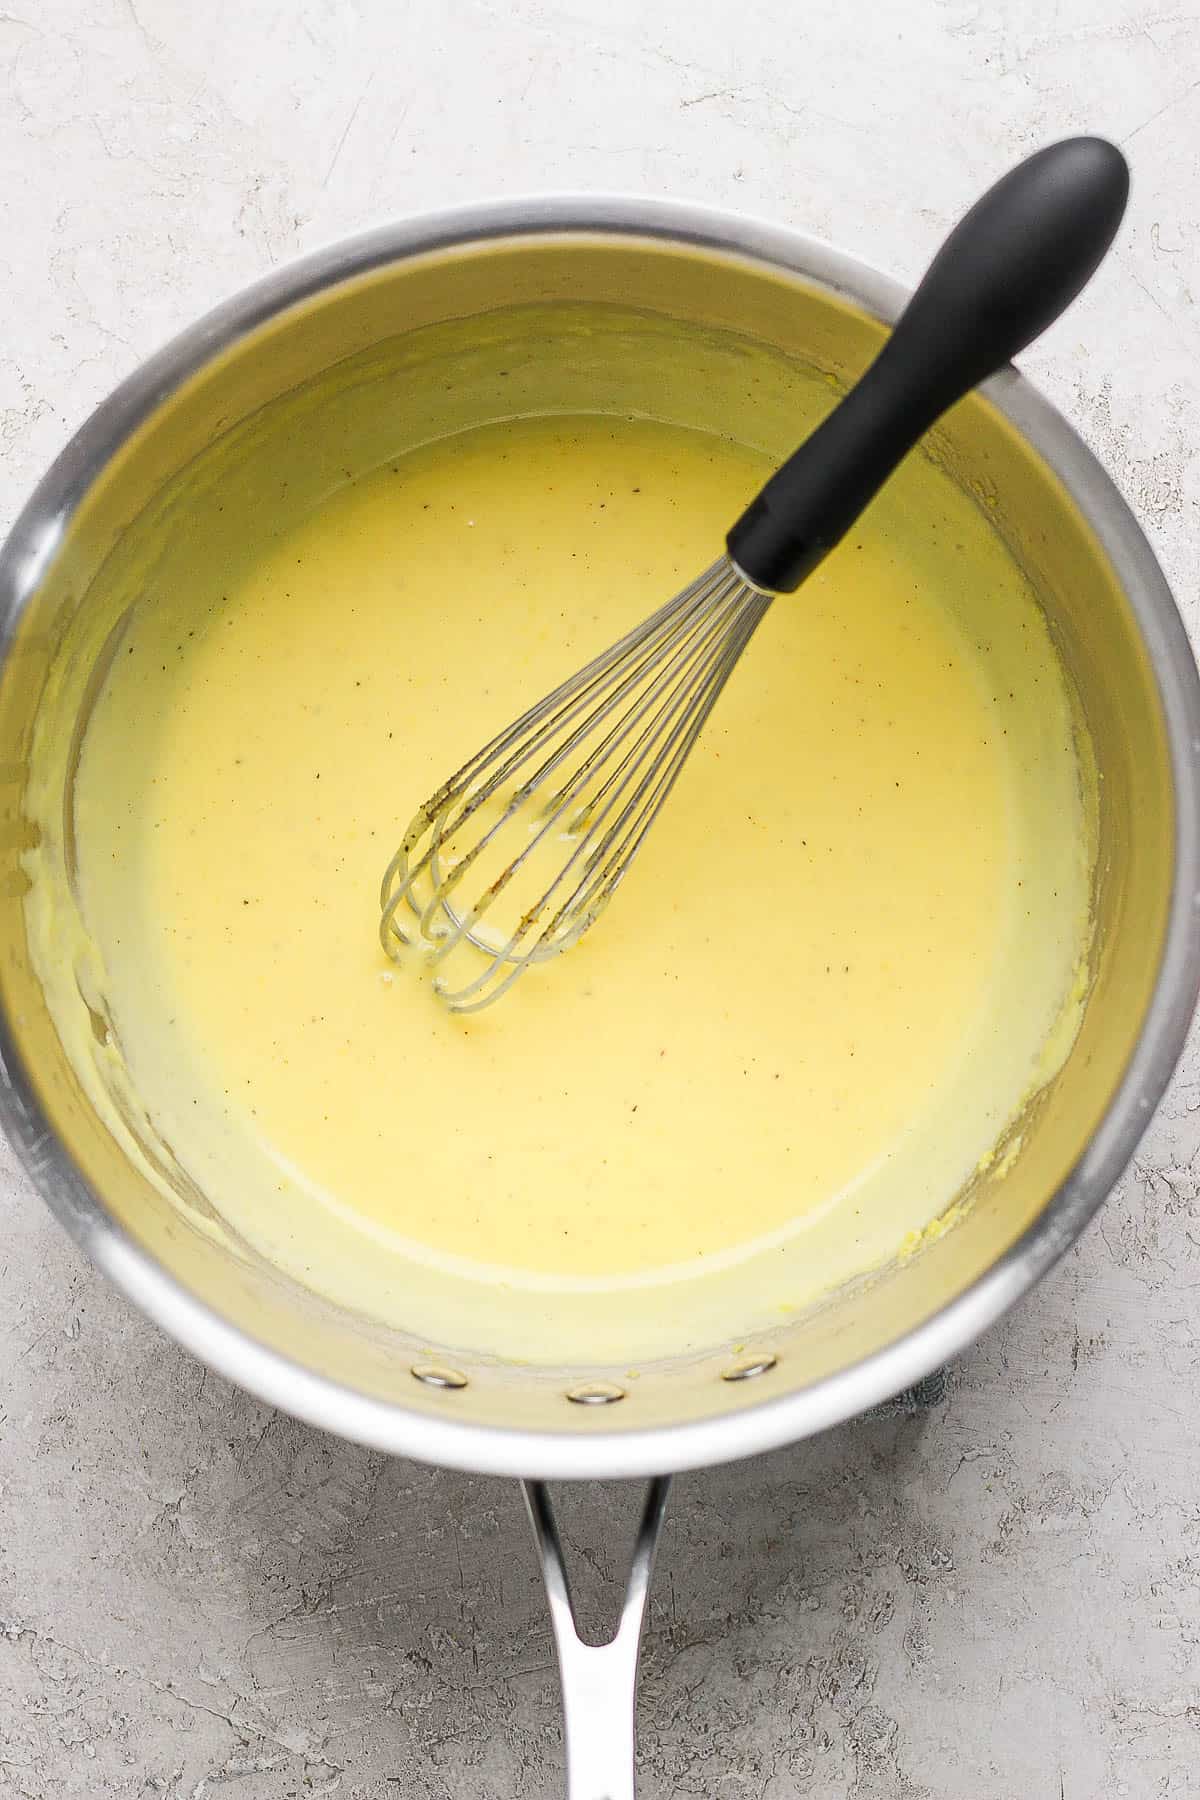 The hollandaise sauce in a saucepan with a whisk.